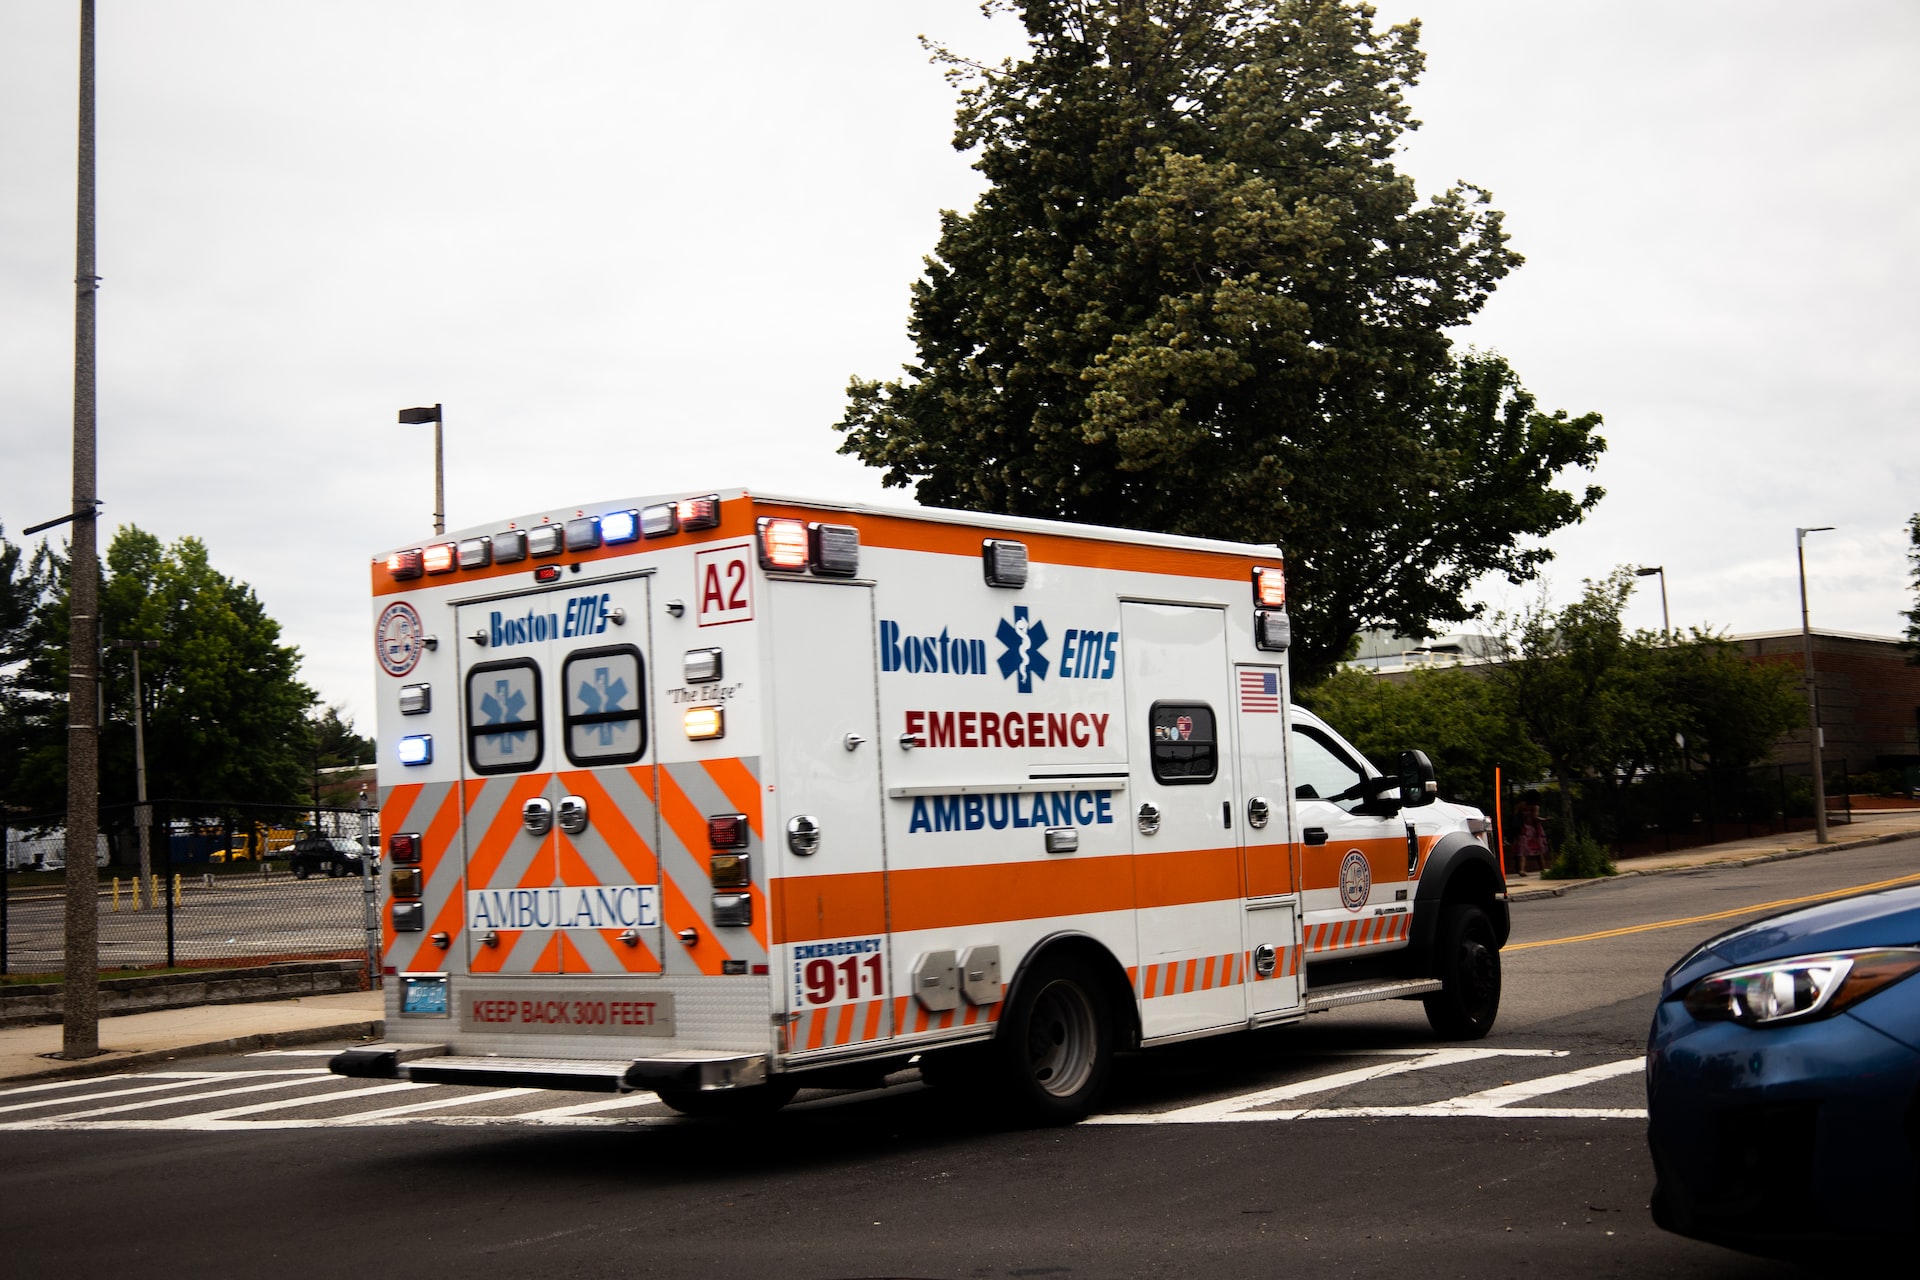 The Many Benefits Of Non-Emergency Medical Transportation